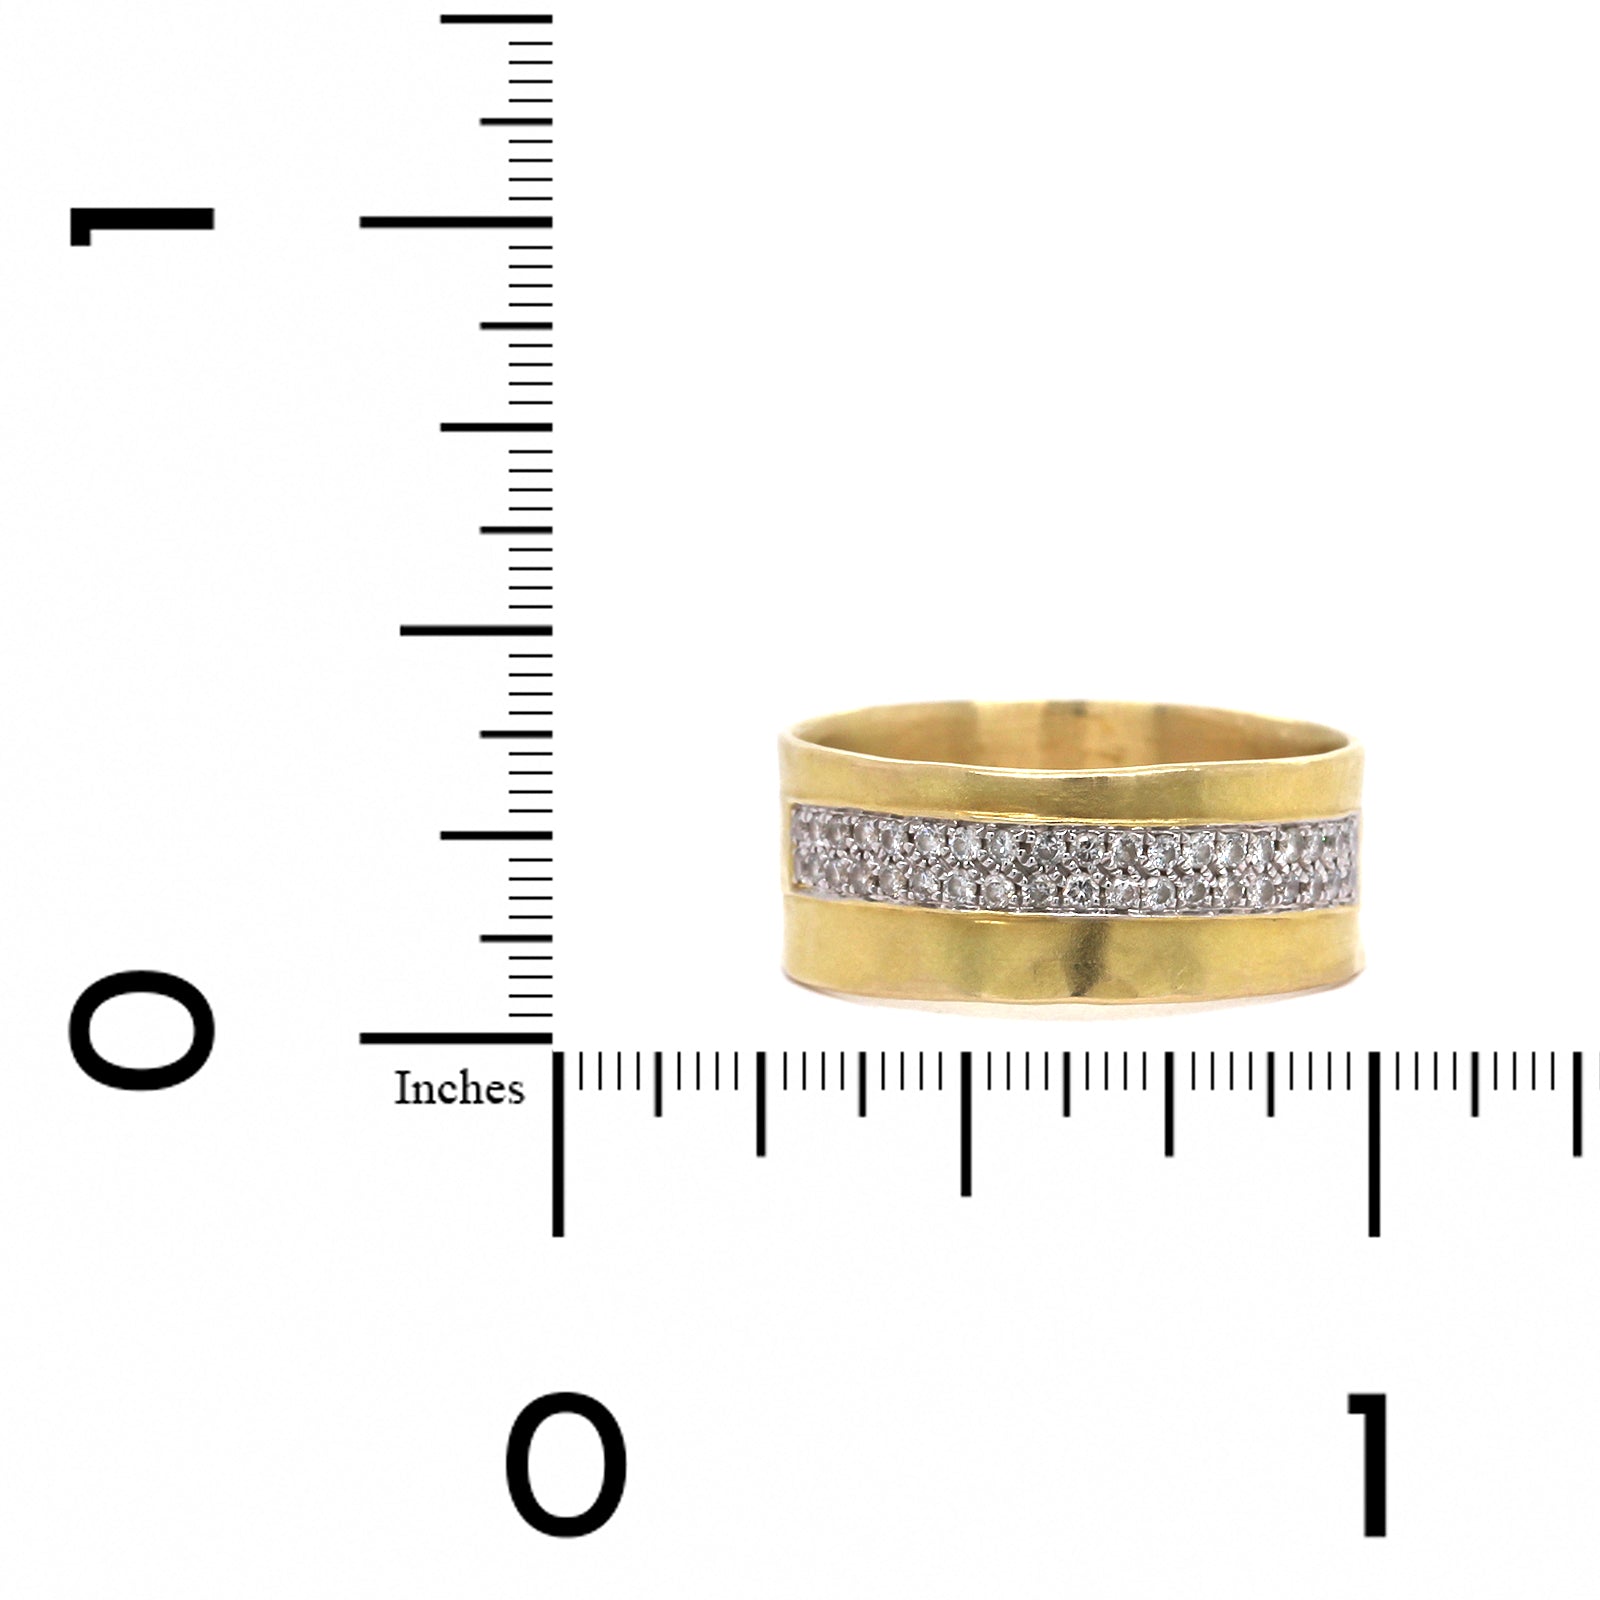 14K Yellow Gold Wide Pave Diamond Ring